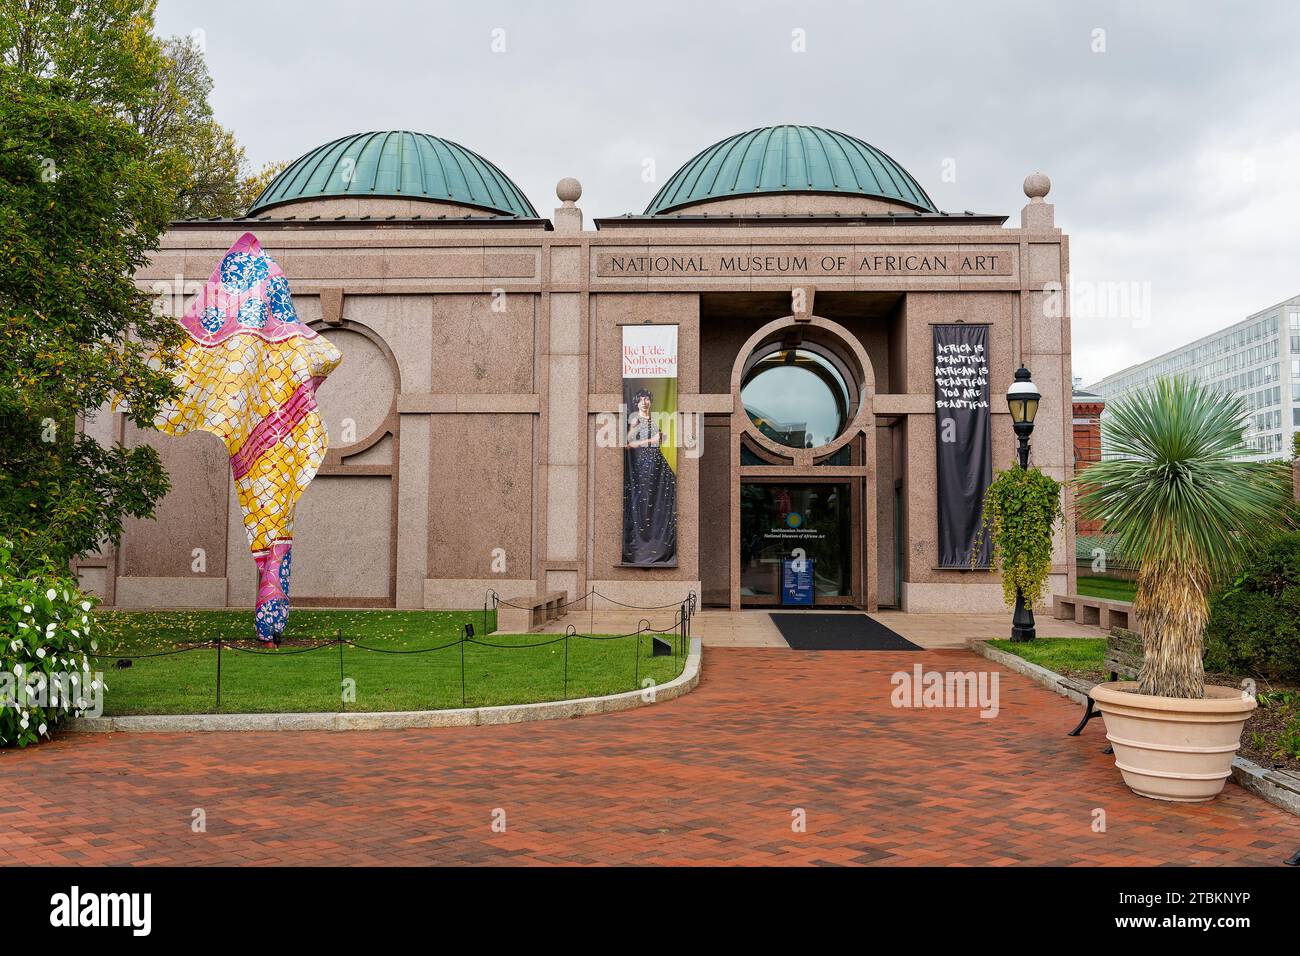 Washington D.C. USA - Sept. 7, 2022: The Smithsonian Institution National Museum of African Art. Stock Photo